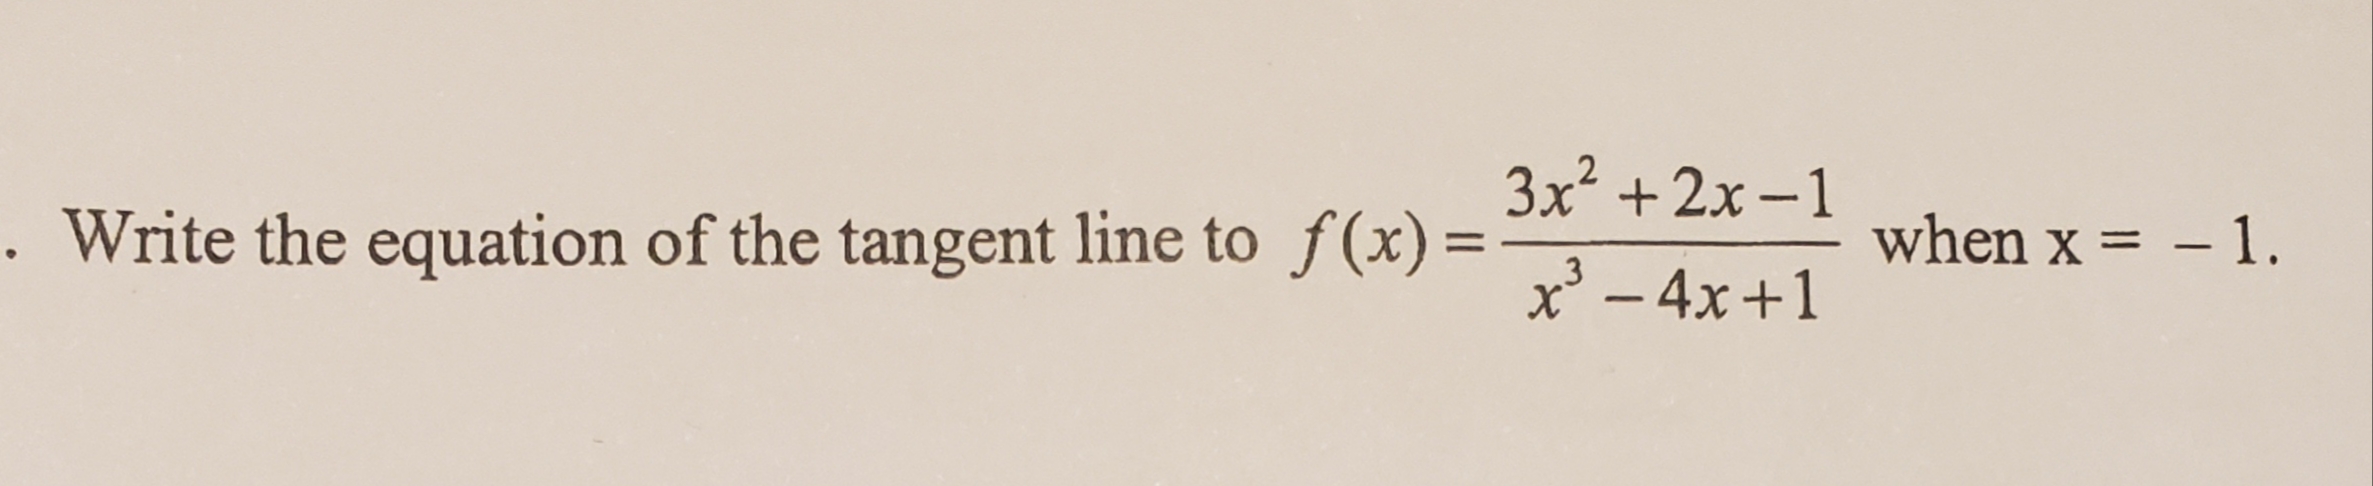 3x² + 2x–1
Write the equation of the tangent line to f(x)=
when x = - 1.
x' - 4x+1
